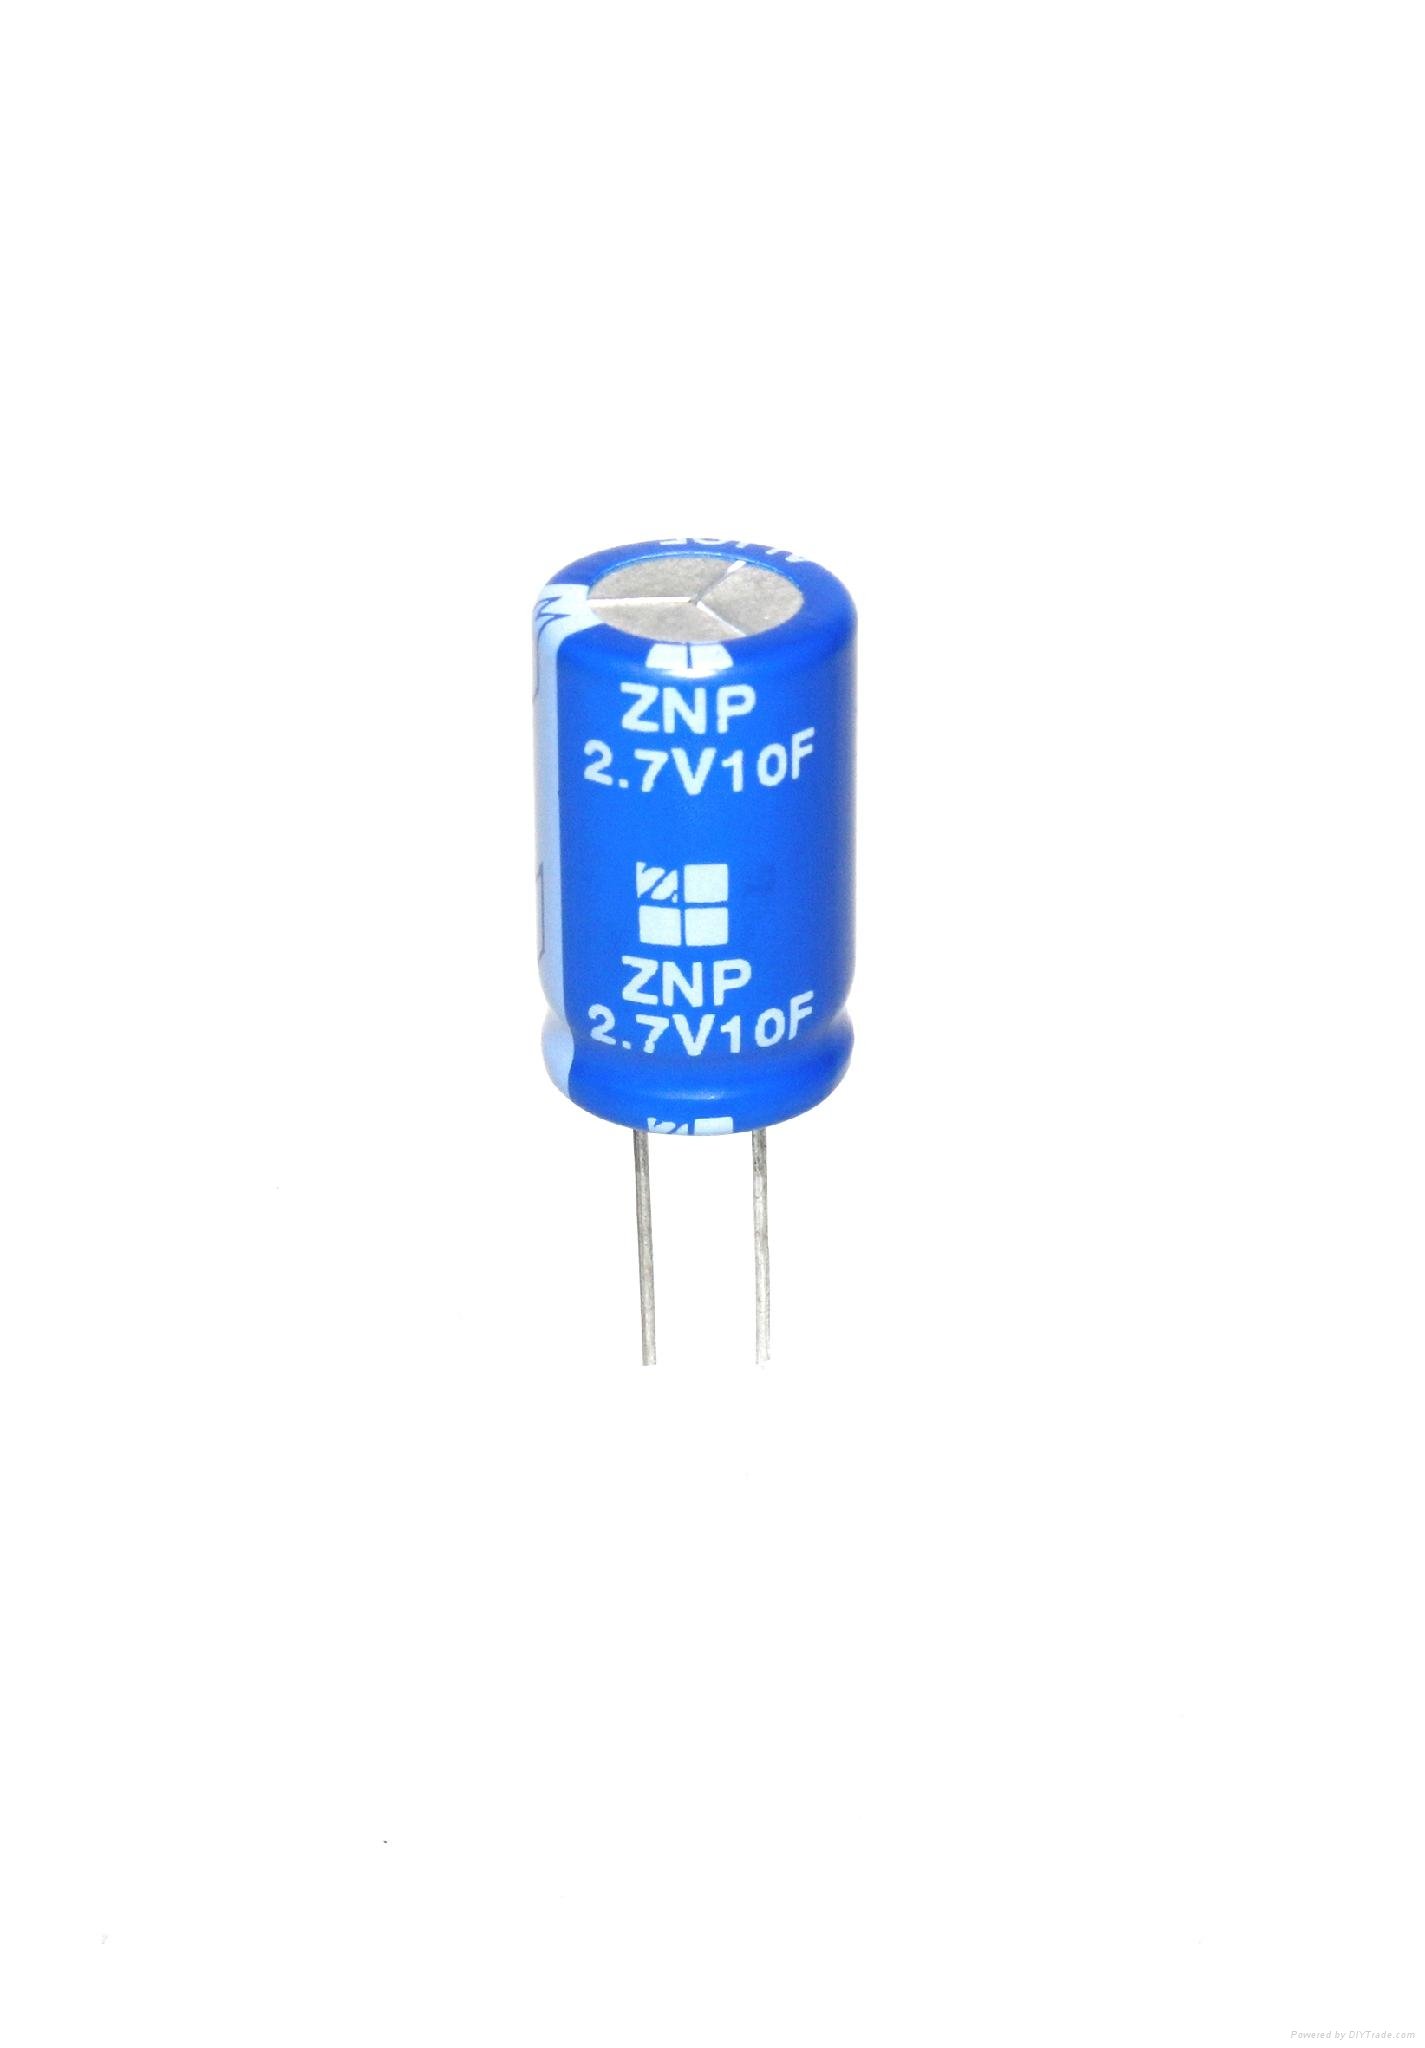 Ultra capacitor 2.7V 10F Supercapacitor cylindrical super capacitor edlc 3